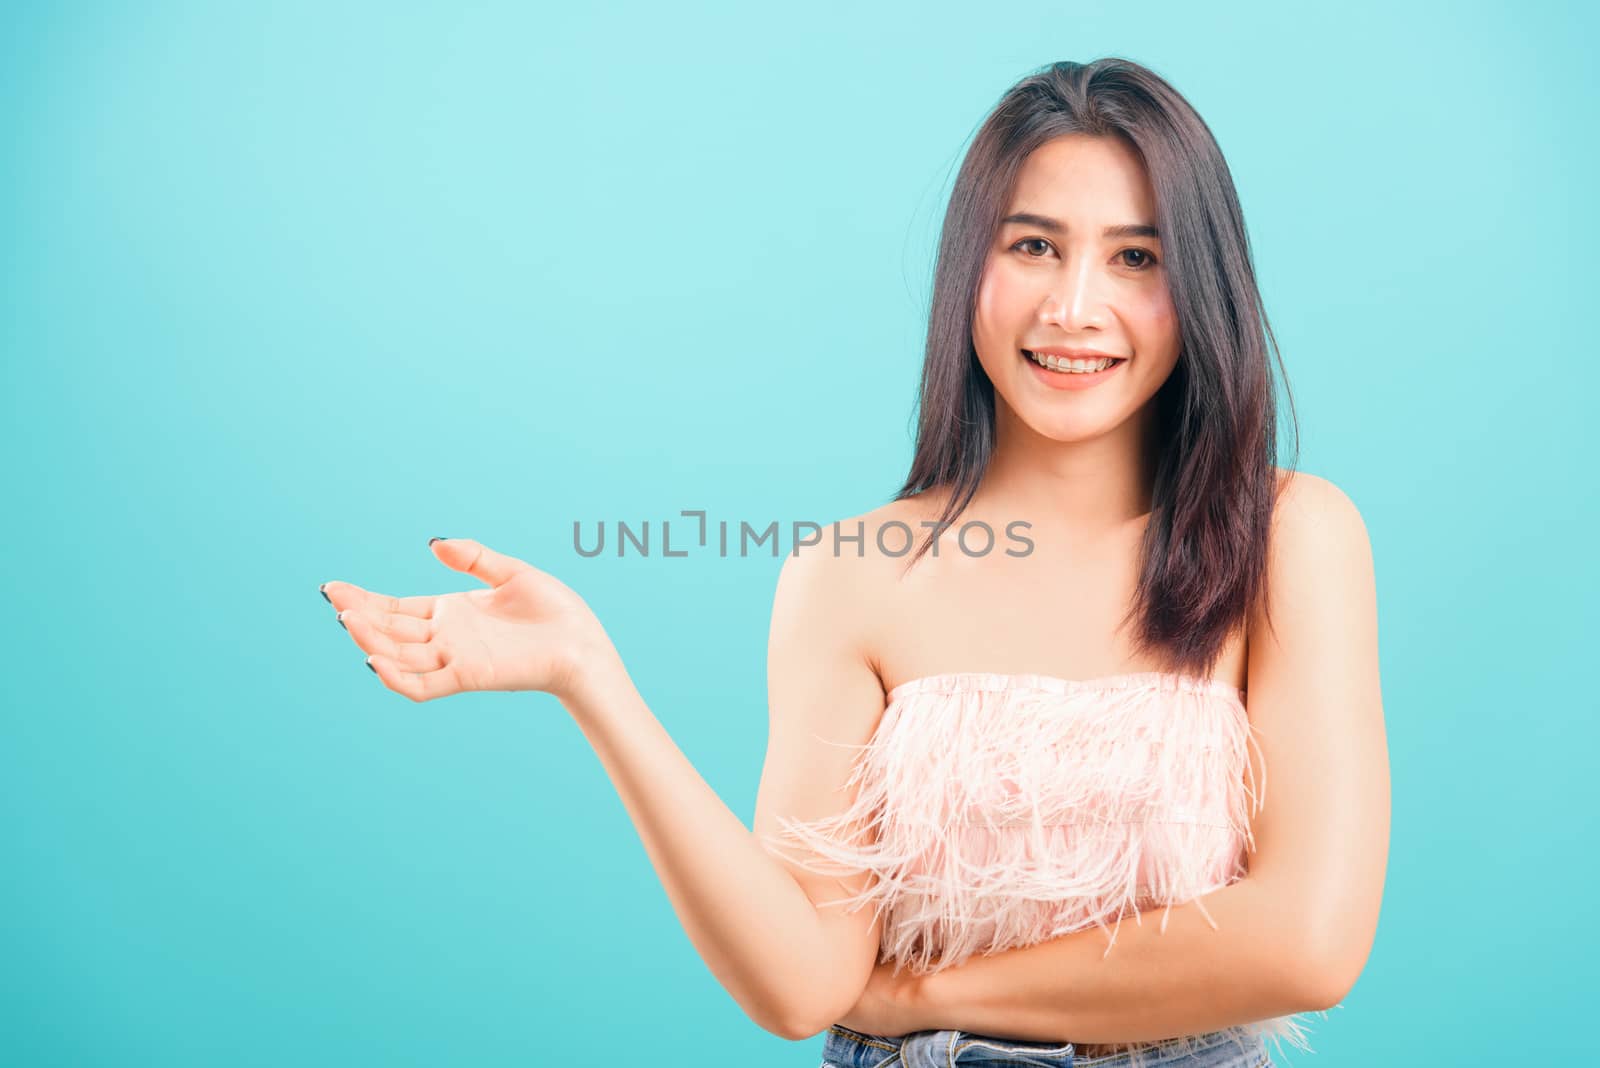 Smiling face Asian beautiful woman her showing hand something near body on blue background, with copy space for text